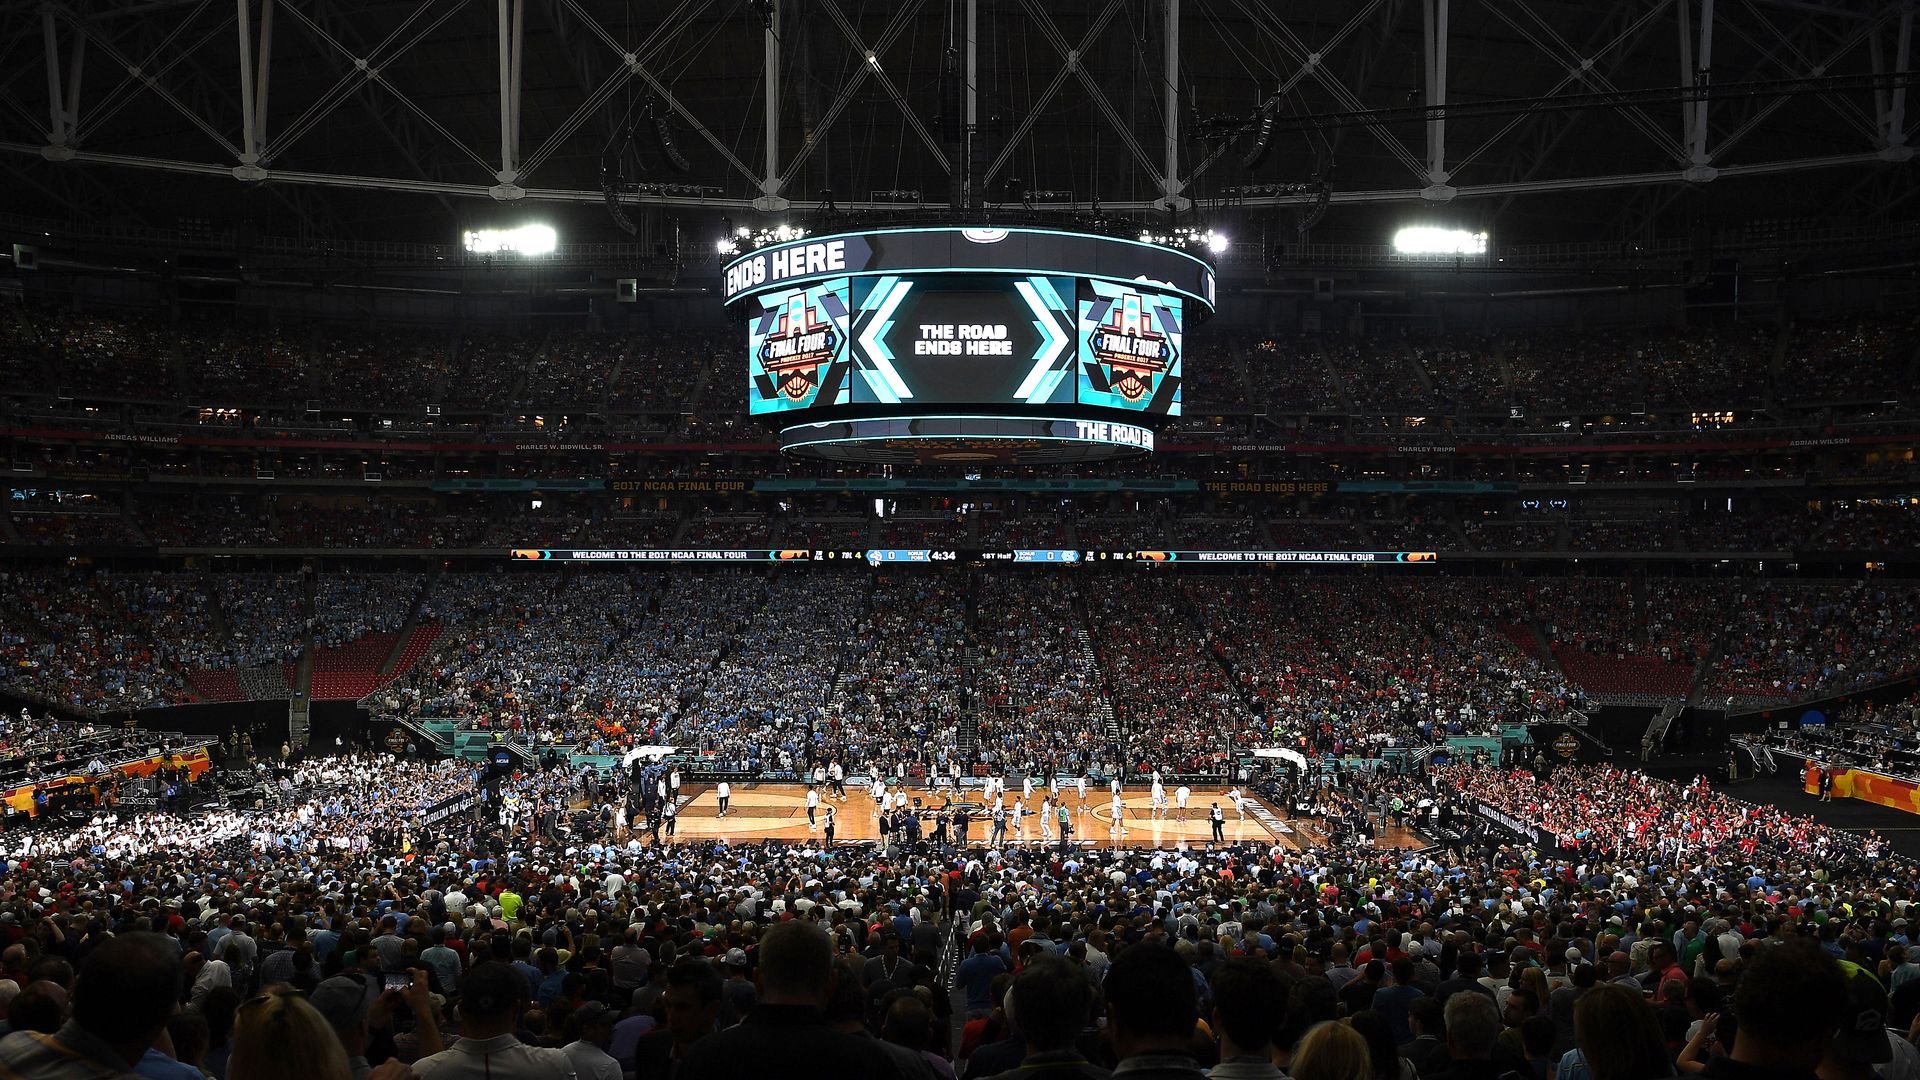 tens of thousands of people in a basketball stadium with a large scoreboard hanging in the middle.